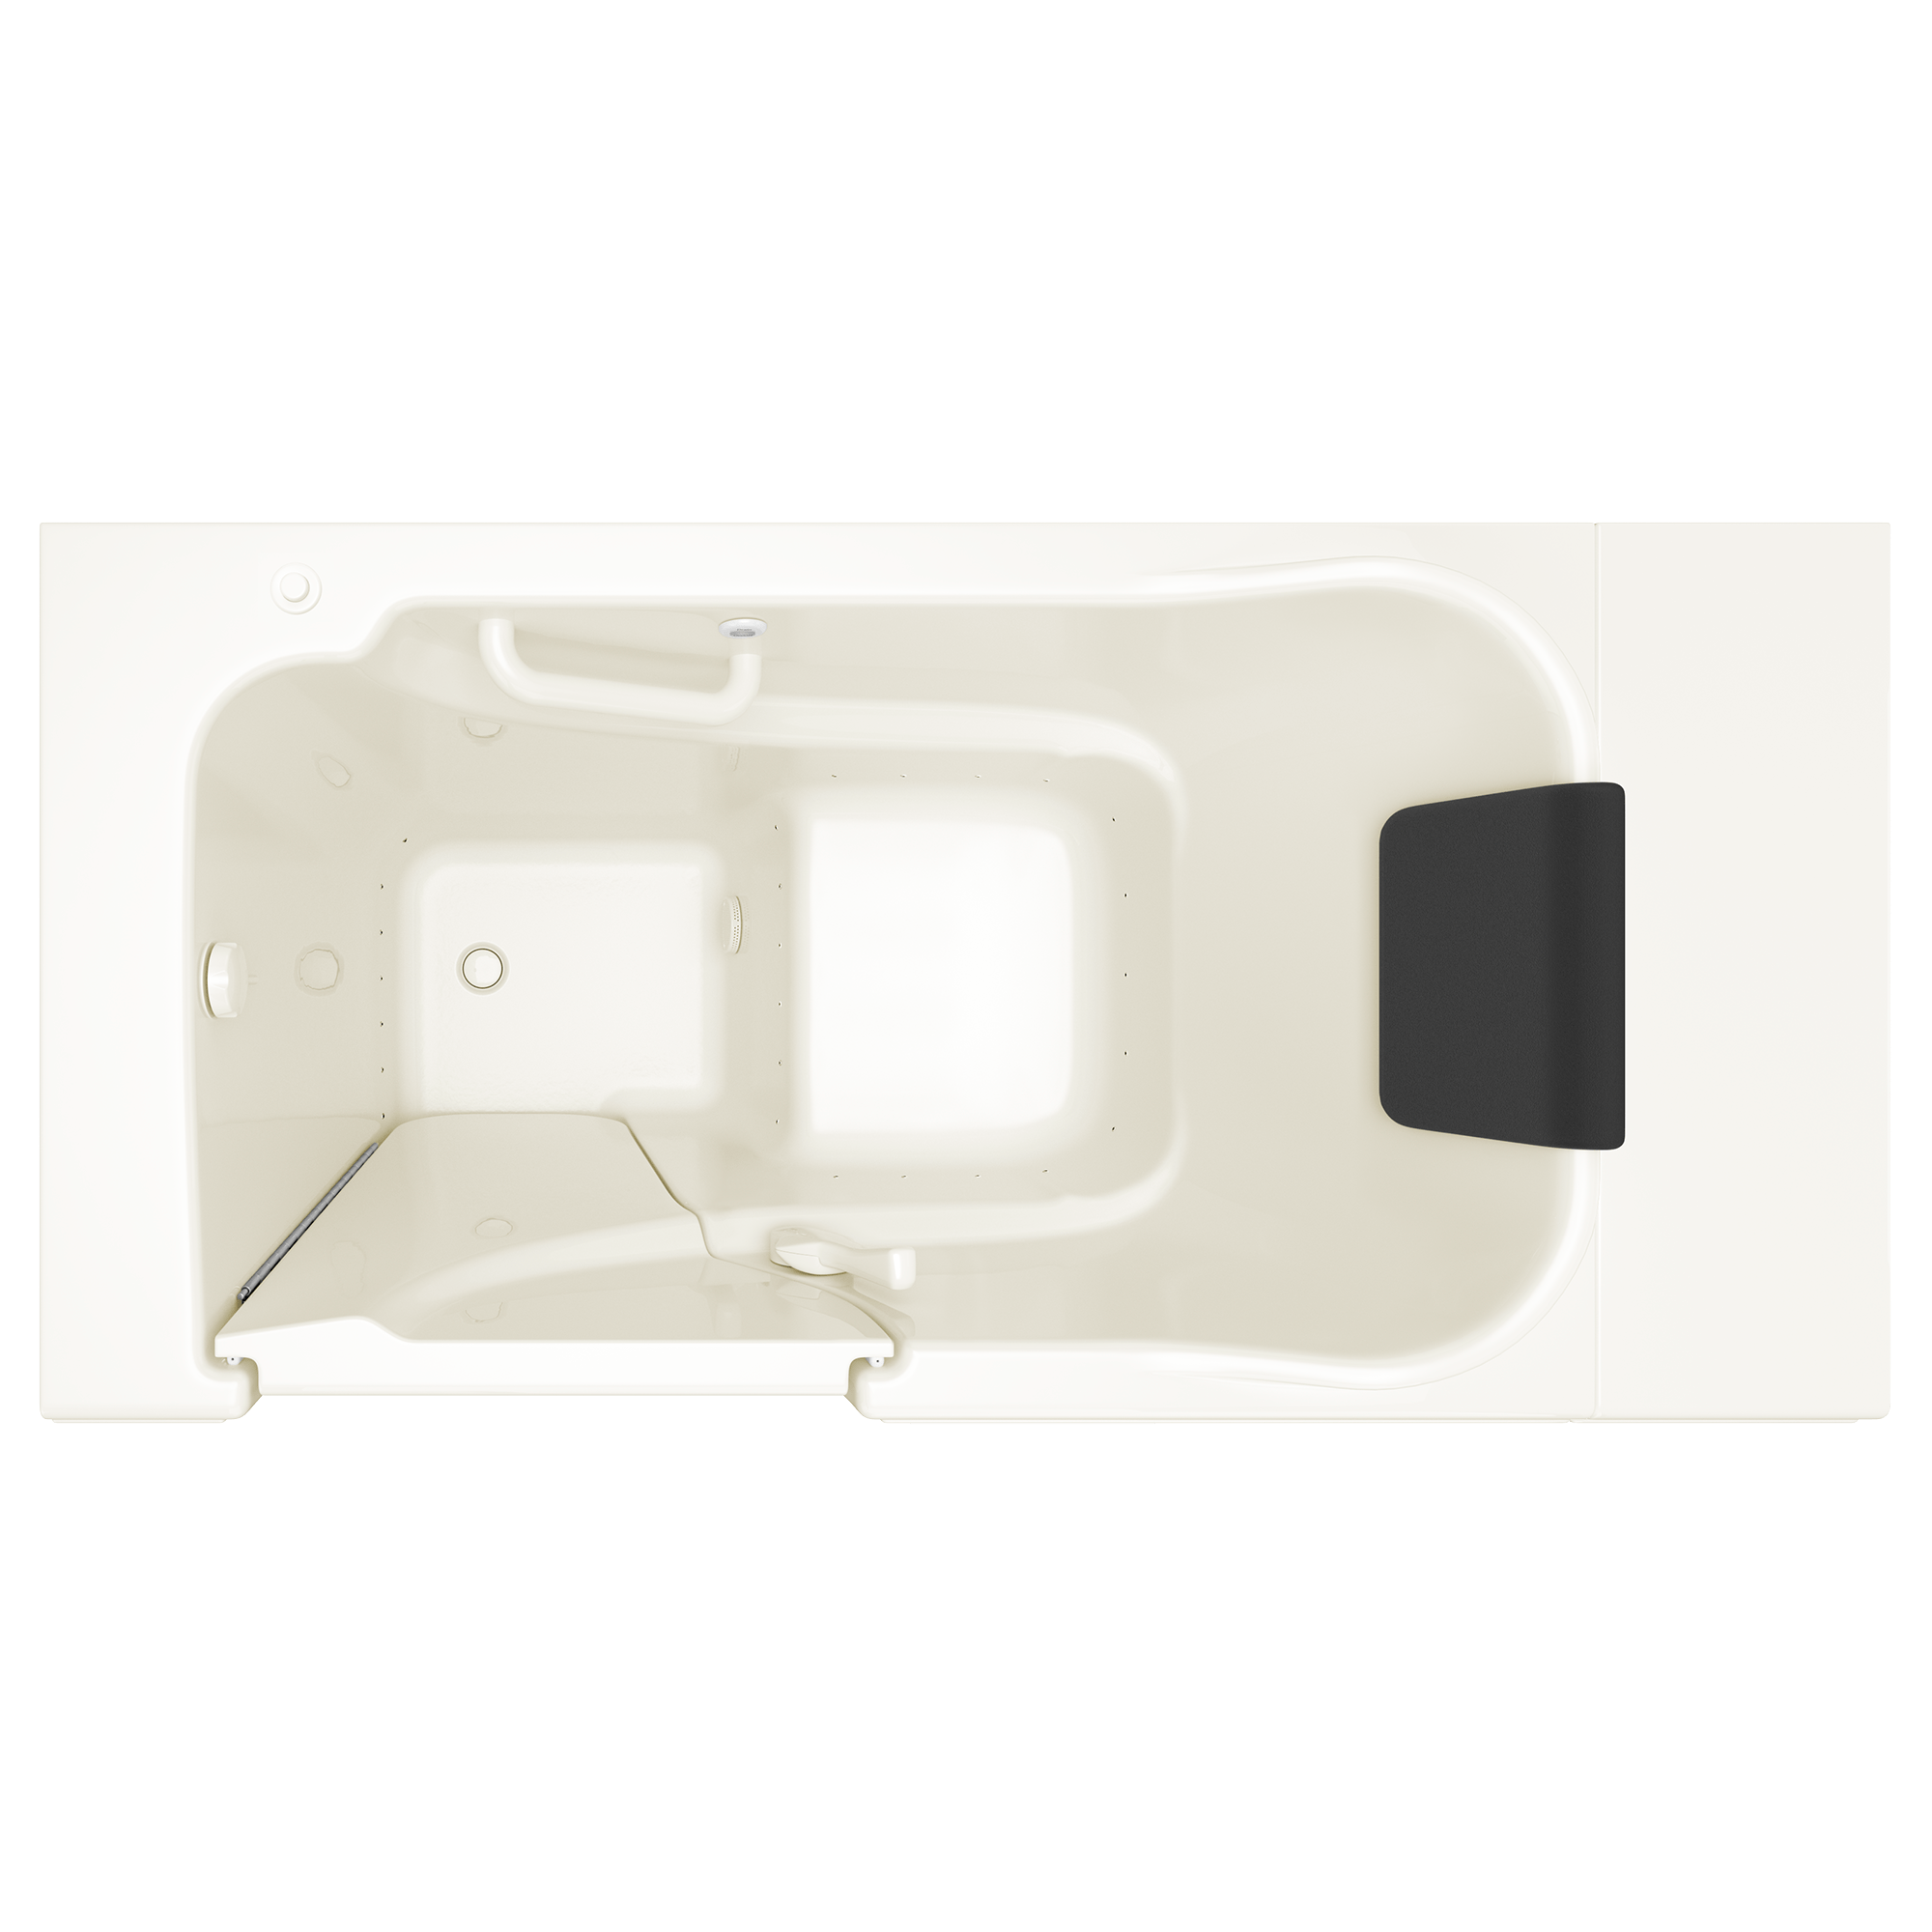 Gelcoat Premium Series 30 x 52 -Inch Walk-in Tub With Air Spa System - Left-Hand Drain